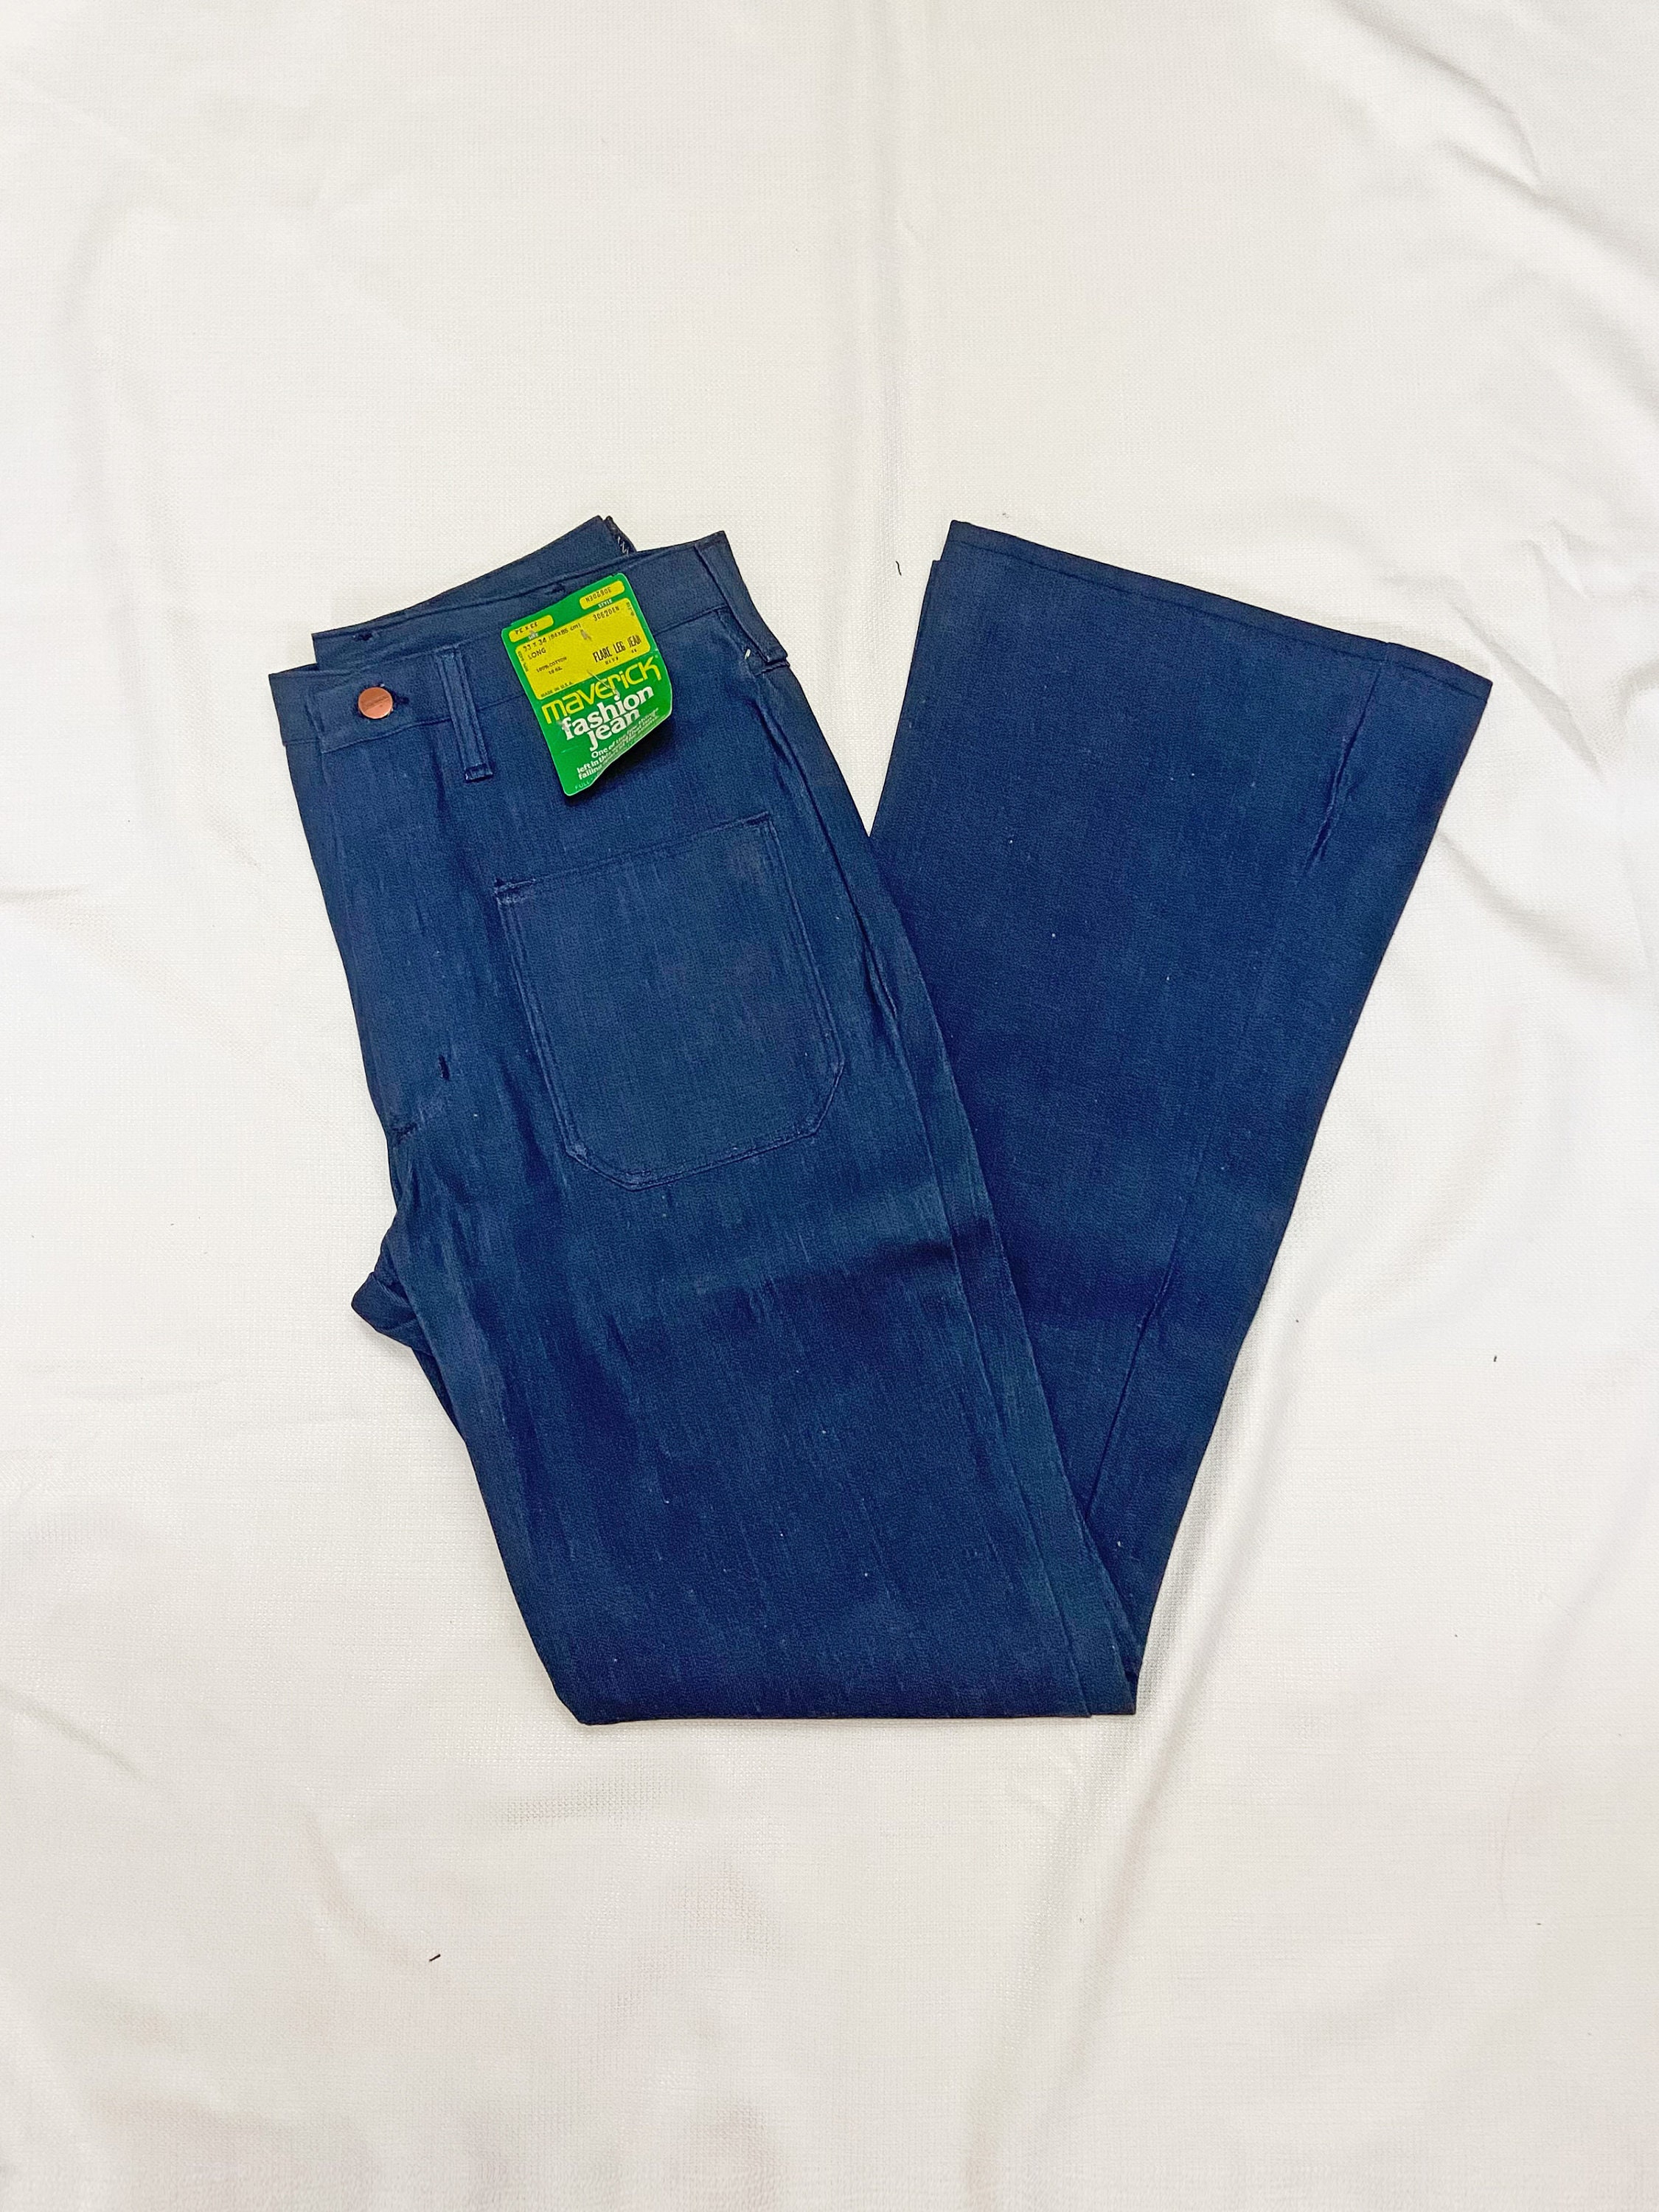 Vintage Retro Mens Denim Flare Pants Men With Bell Bottoms And Wide Legs  Slim Fit Cowboy Style From Corrigang, $20.03